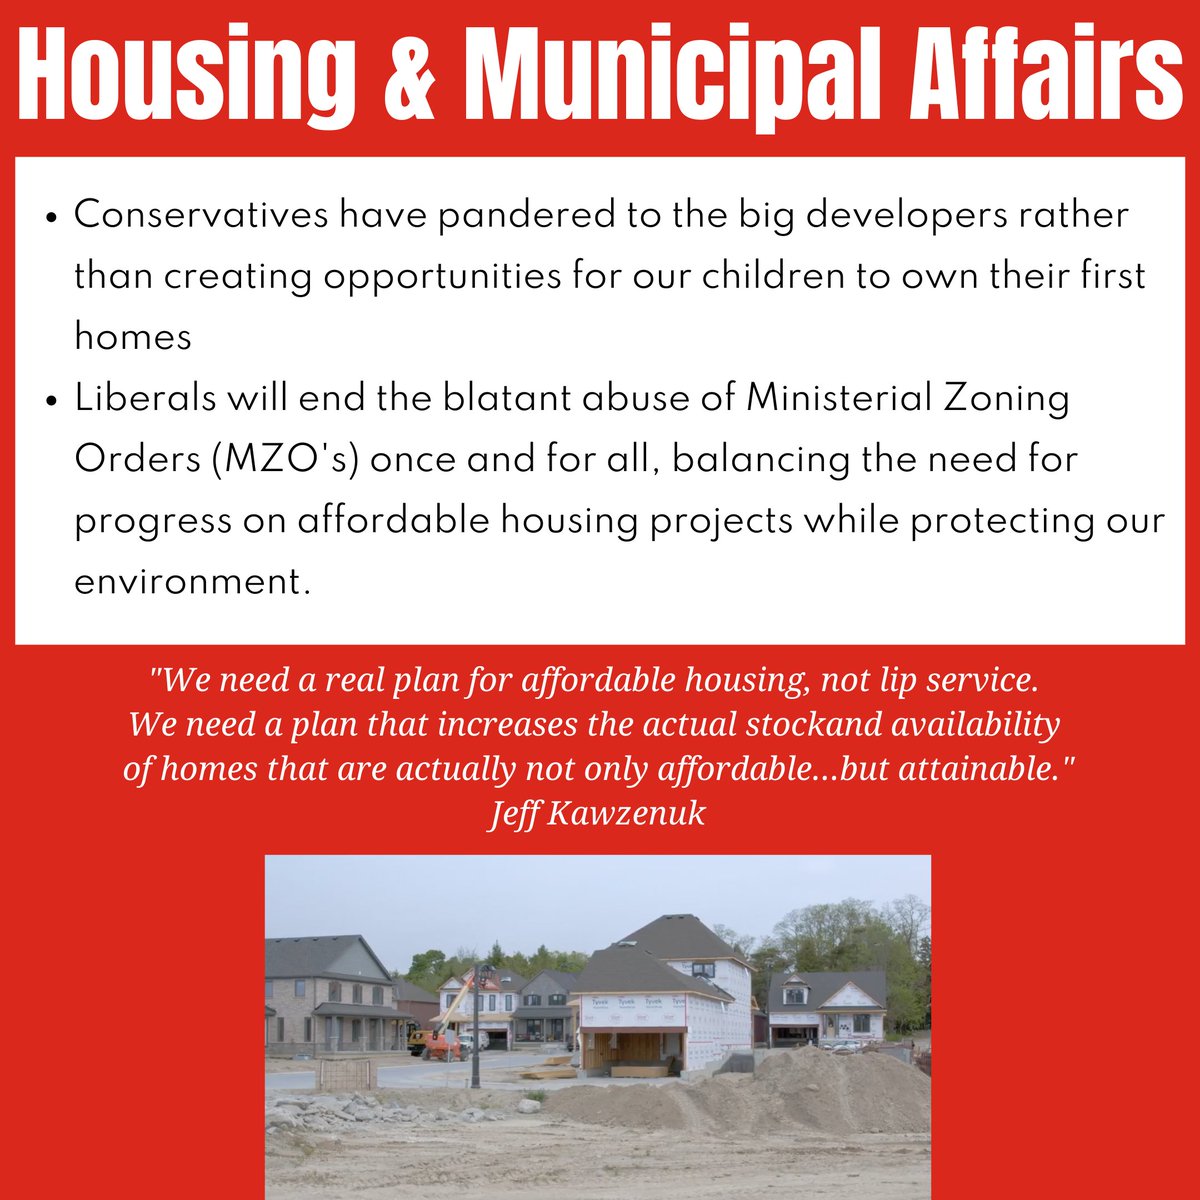 Over the coming years, Ontarians deserve a government that will address the affordable housing crisis. Over the past four years, conservatives have pandered to big developers. Ontario Liberals will focus on not simply making houses affordable, but attainable for Ontarians.